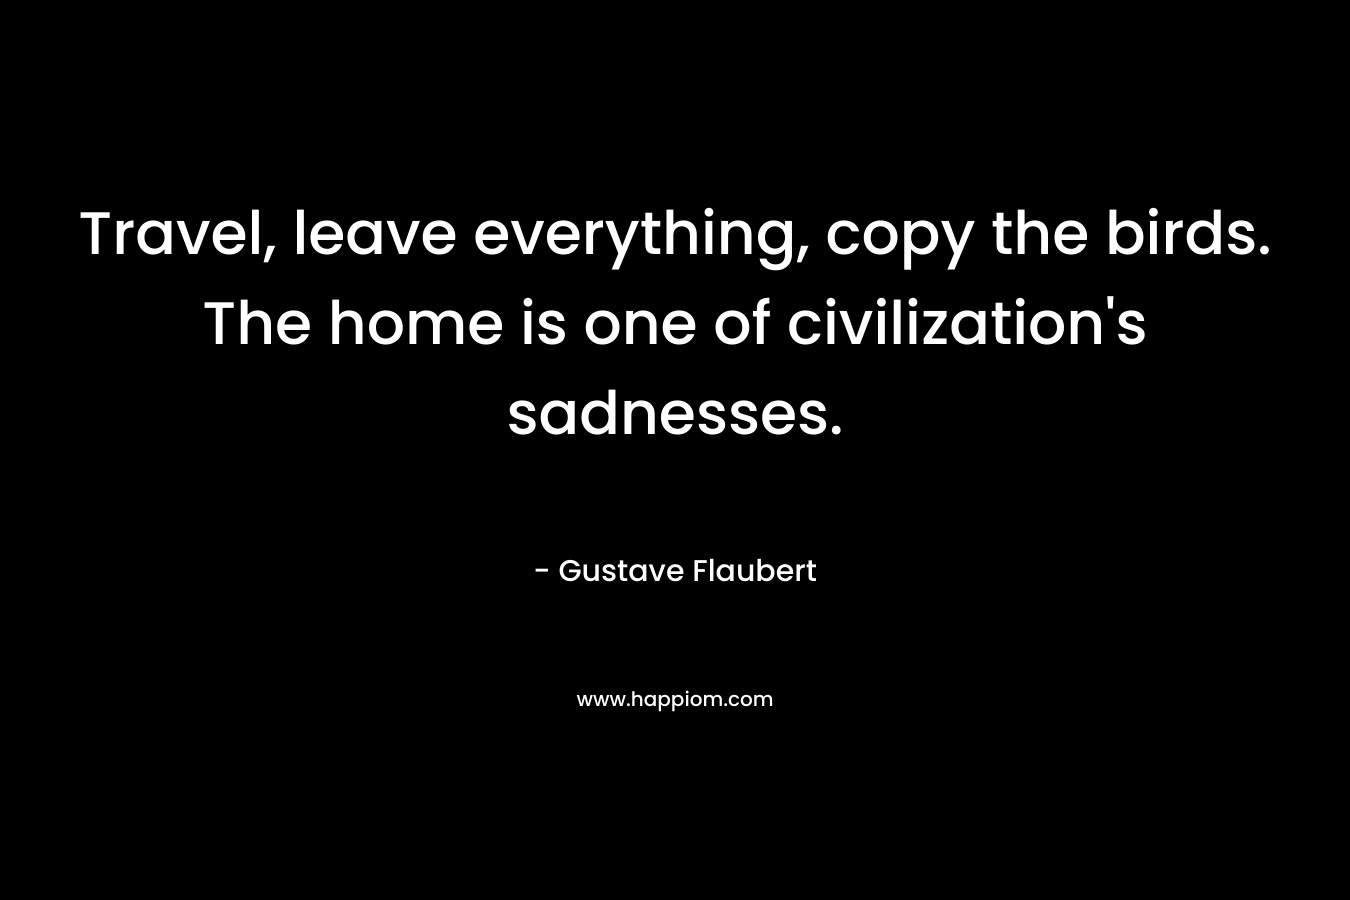 Travel, leave everything, copy the birds. The home is one of civilization’s sadnesses. – Gustave Flaubert